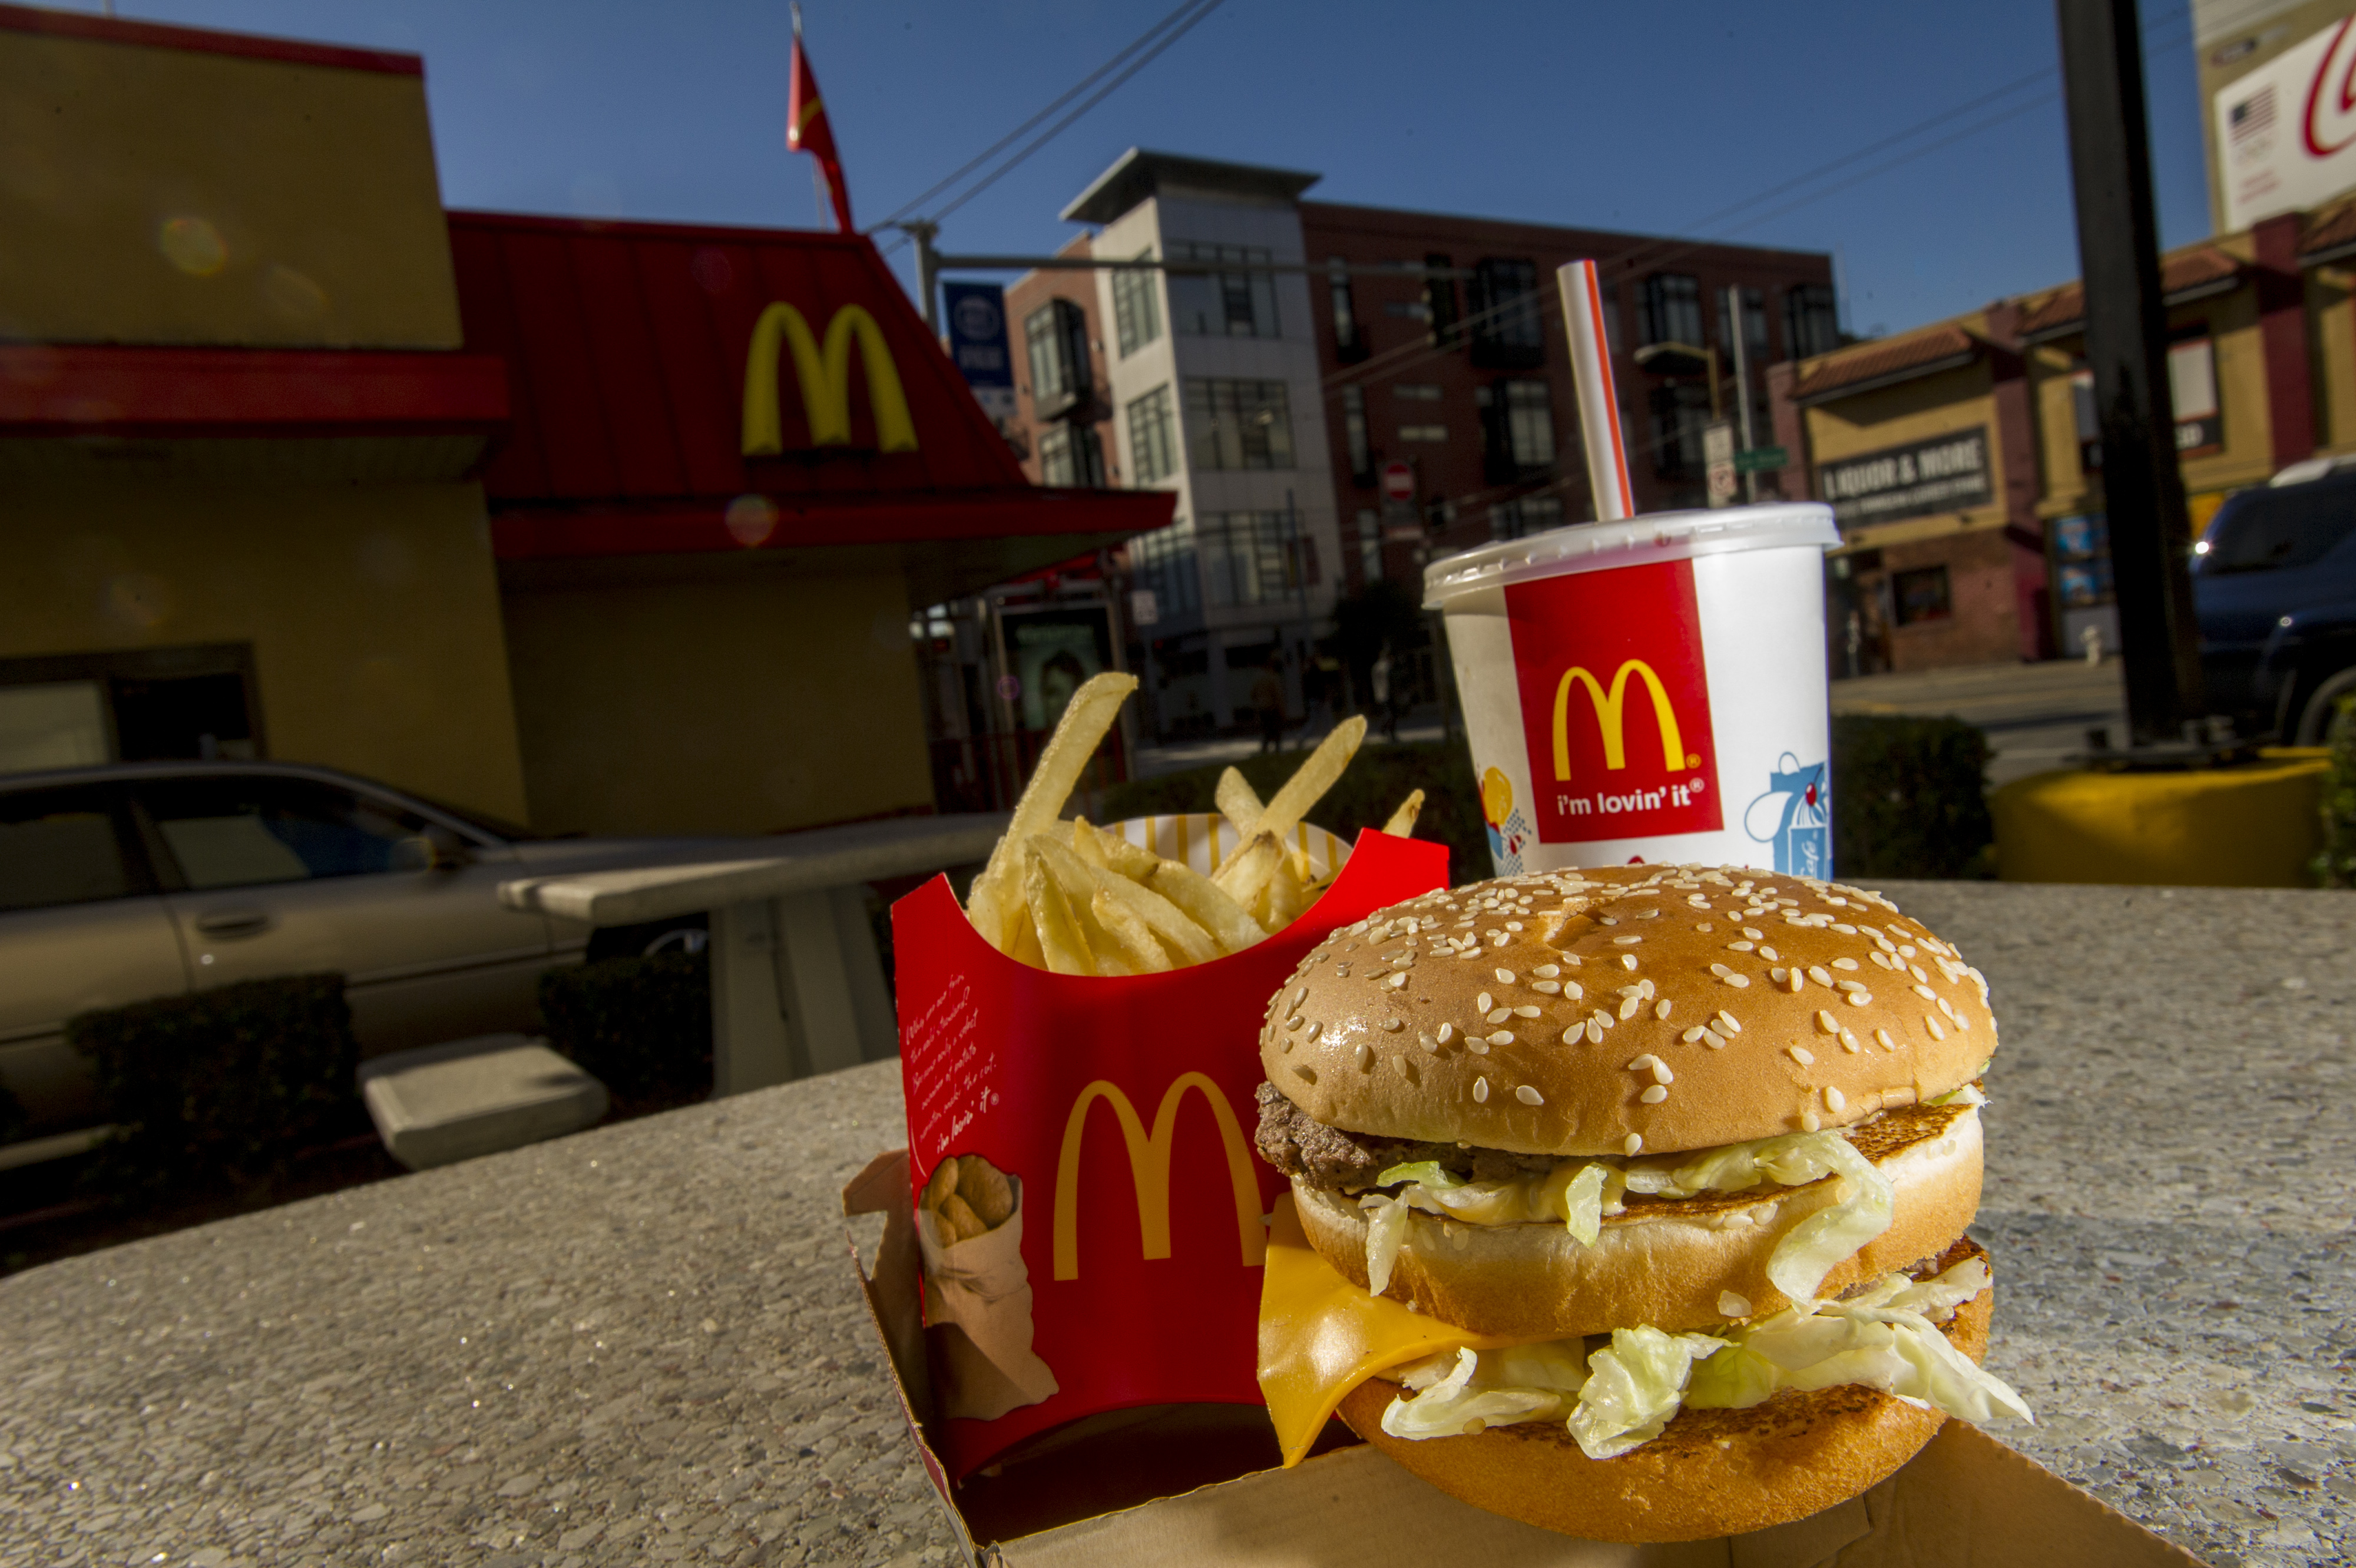 A McDonald's Corp. Big Mac meal is arranged for a photograph outside of a restaurant in San Francisco, California, U.S., on Wednesday, Jan. 22, 2014. (David Paul Morris—Bloomberg / Getty Images)